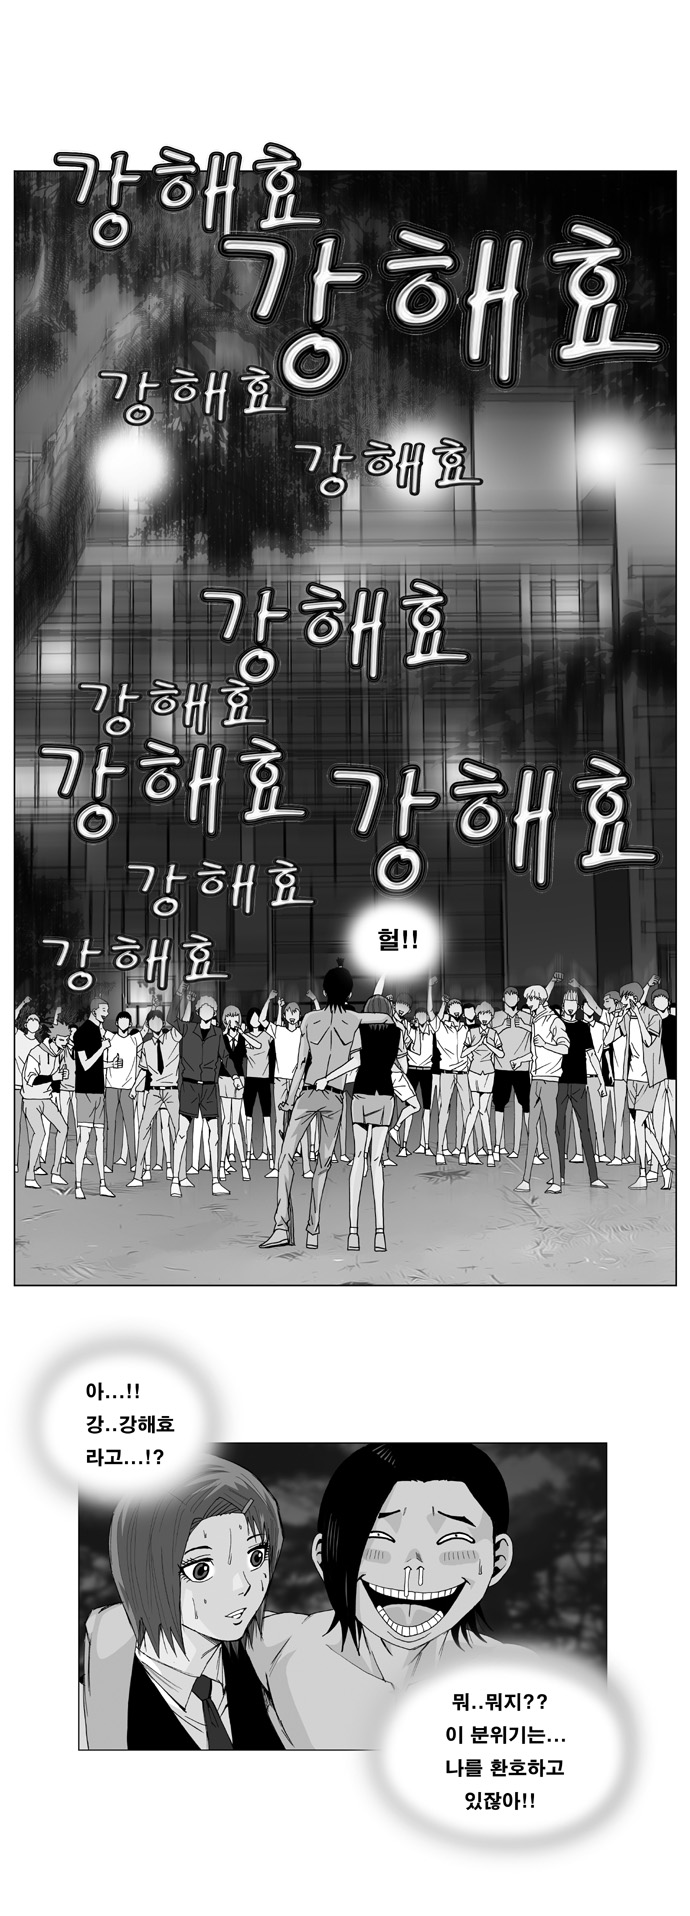 Ultimate Legend - Kang Hae Hyo - Chapter 4 - Page 1